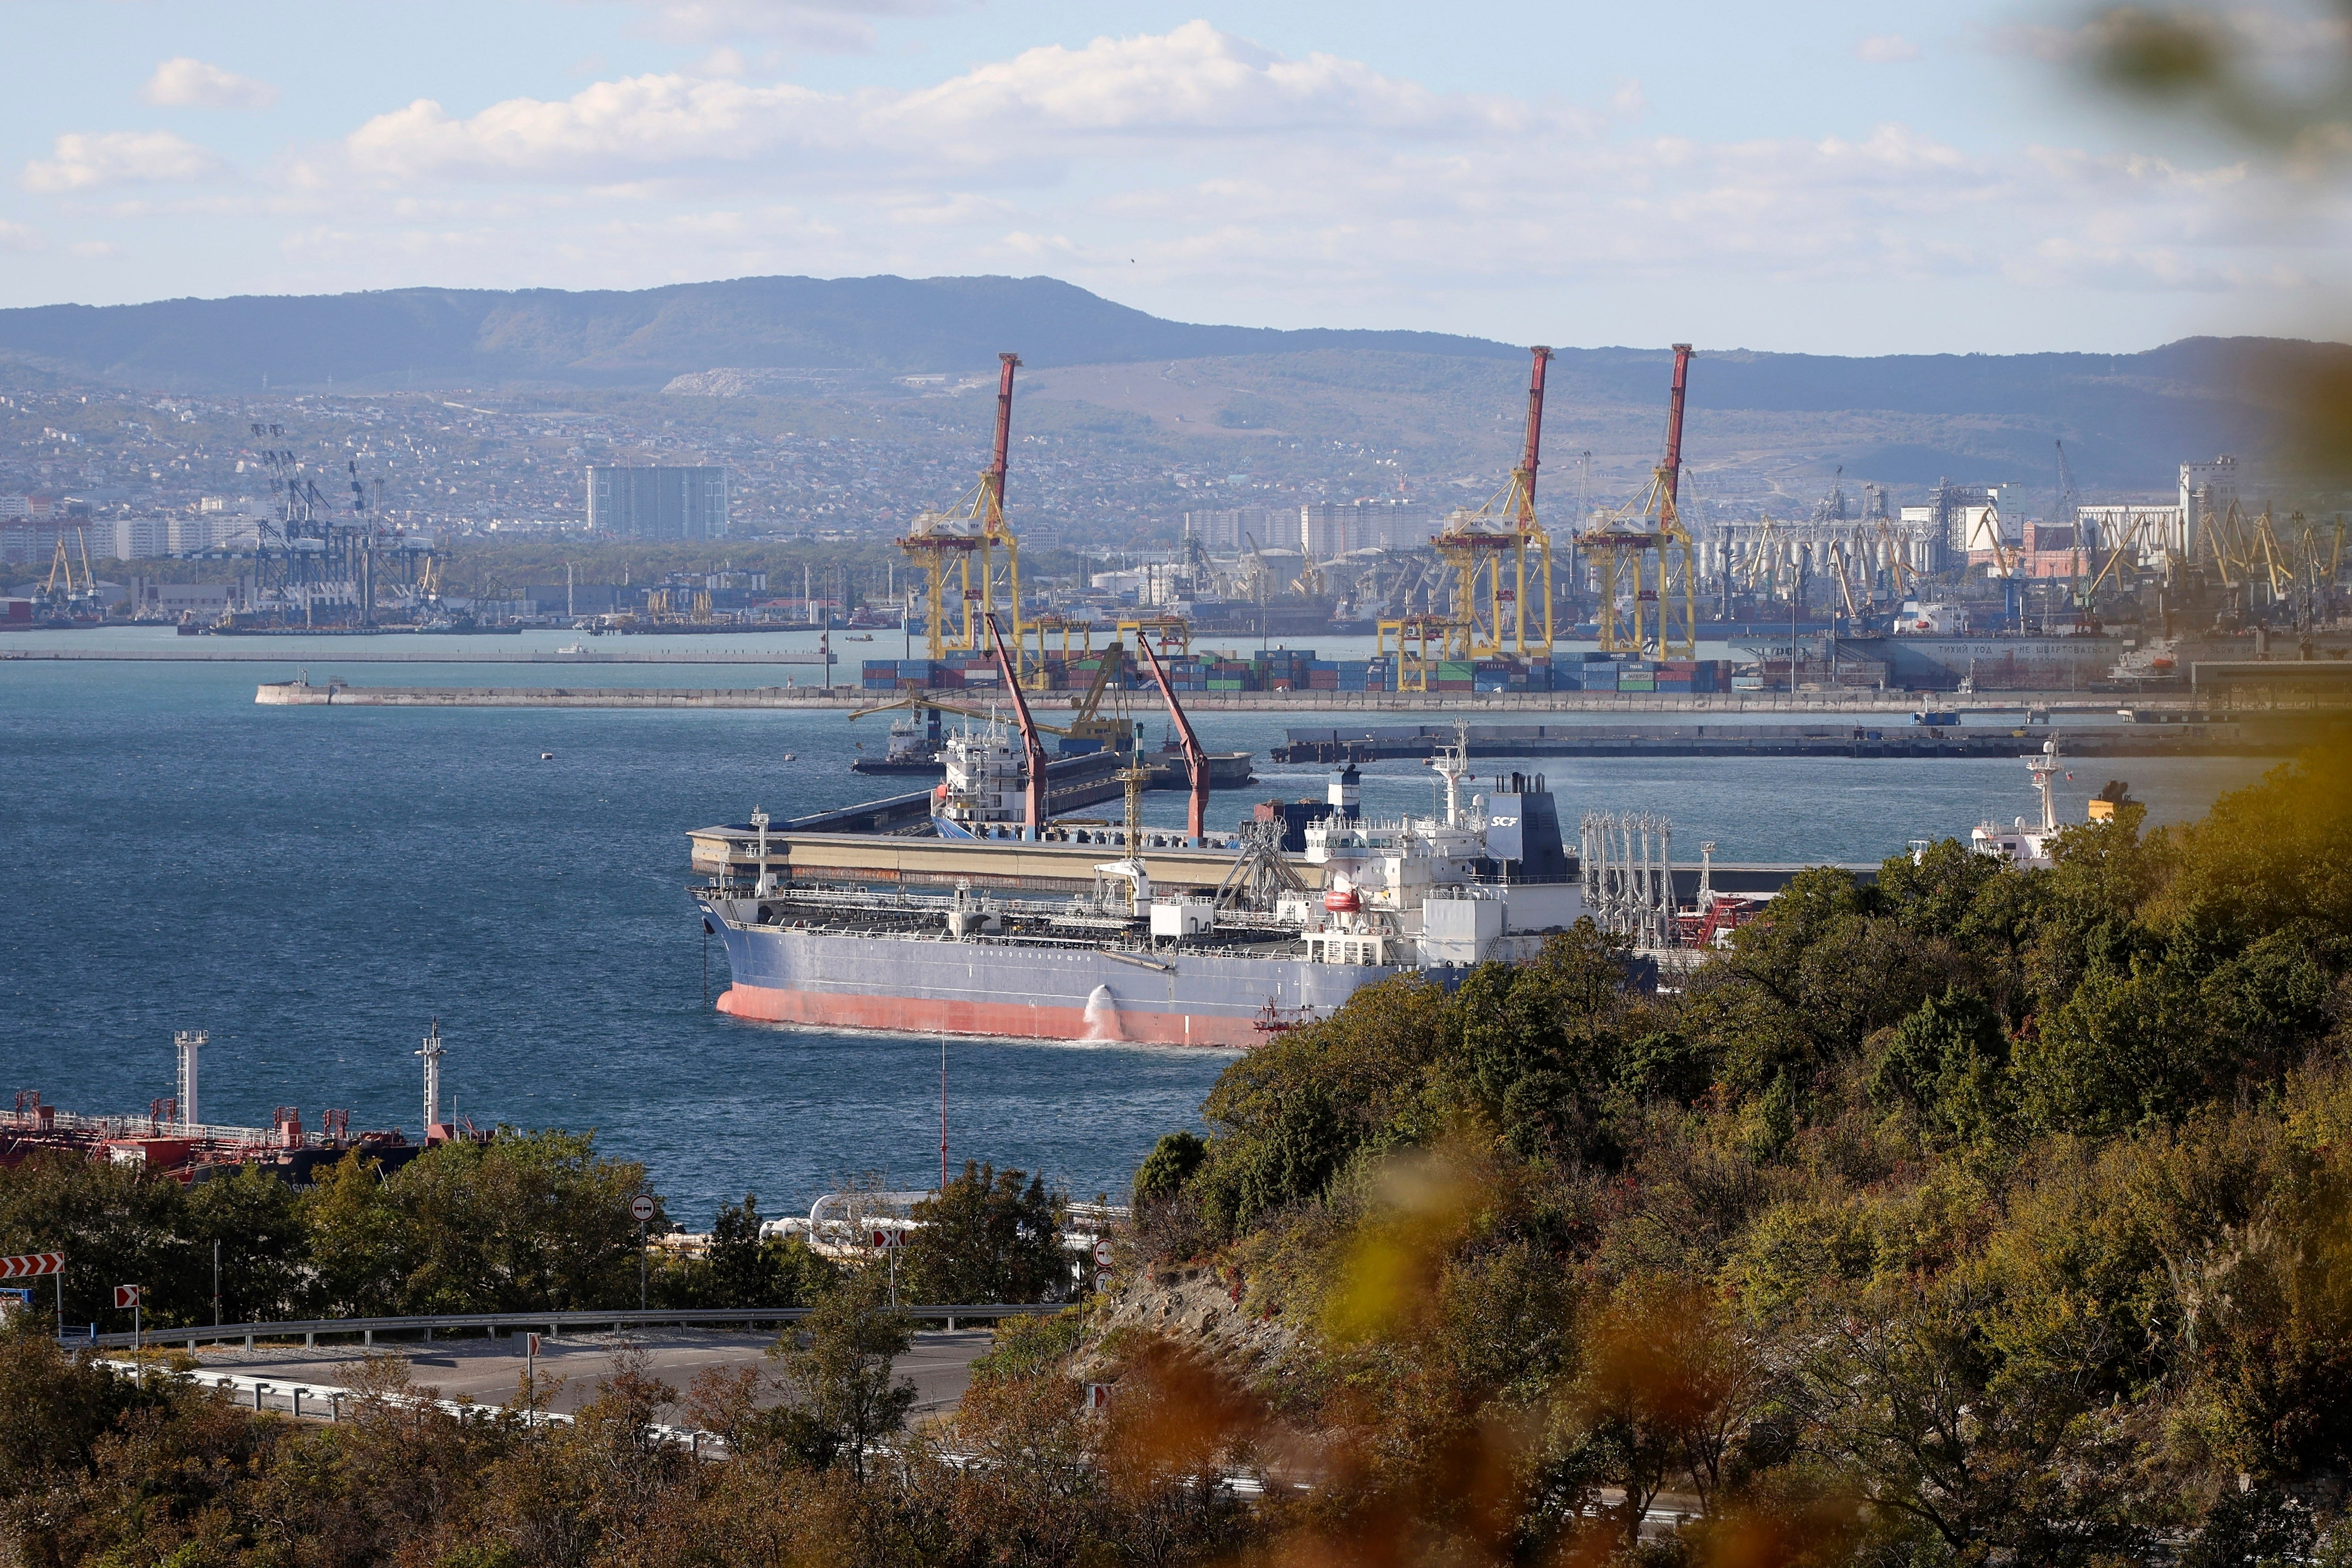 FileL An oil tanker is moored at the Sheskharis complex, part of Chernomortransneft JSC, a subsidiary of Transneft PJSC, in Novorossiysk, Russia